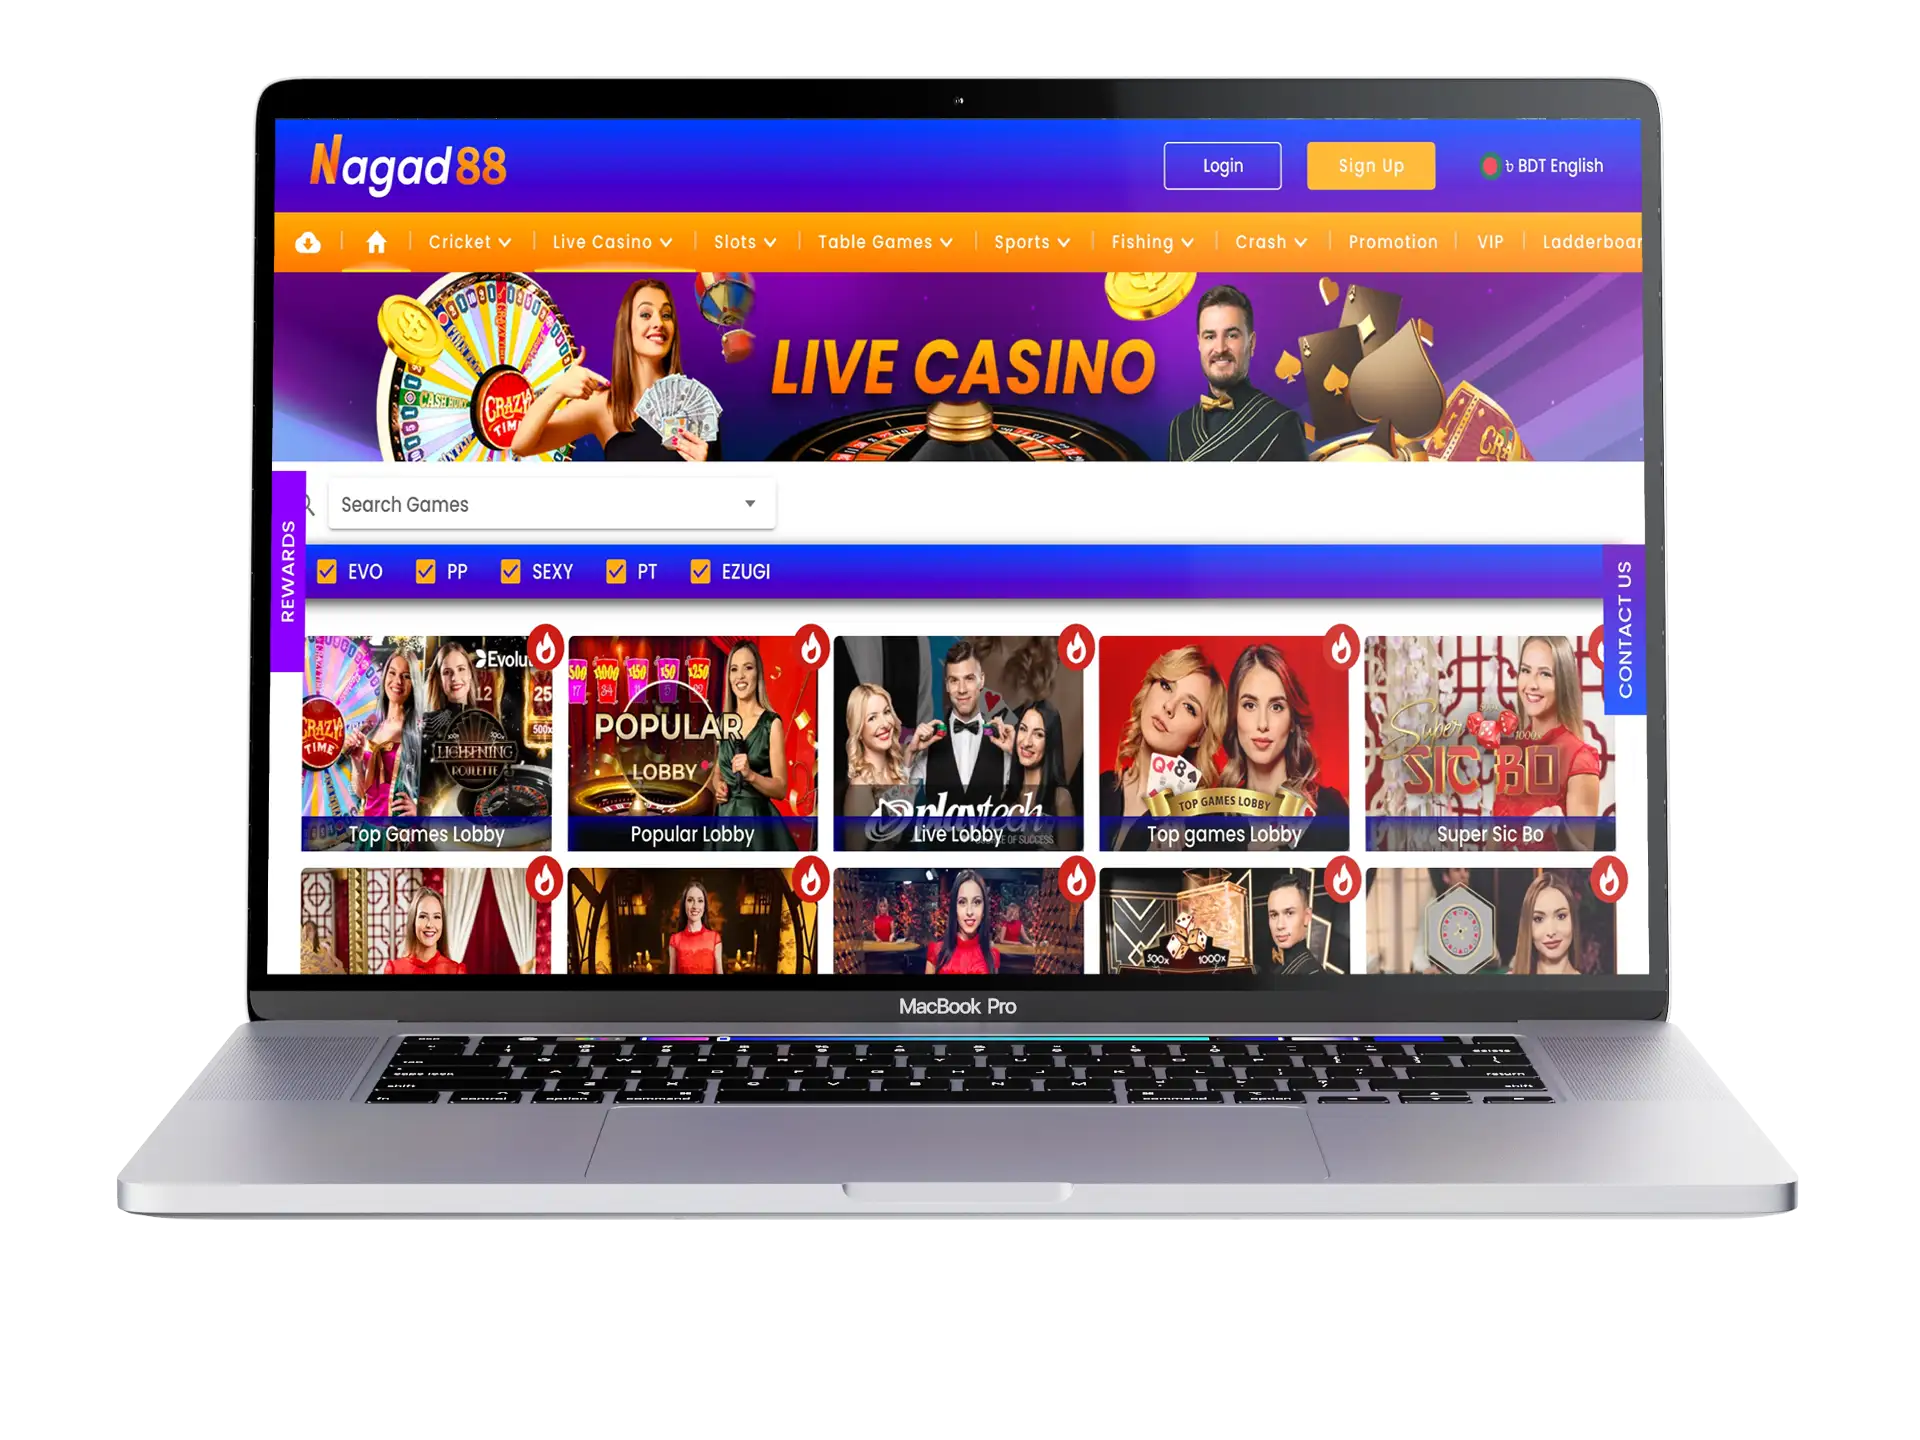 Enjoy the well-designed casino interface on the Nagad88 app and website.